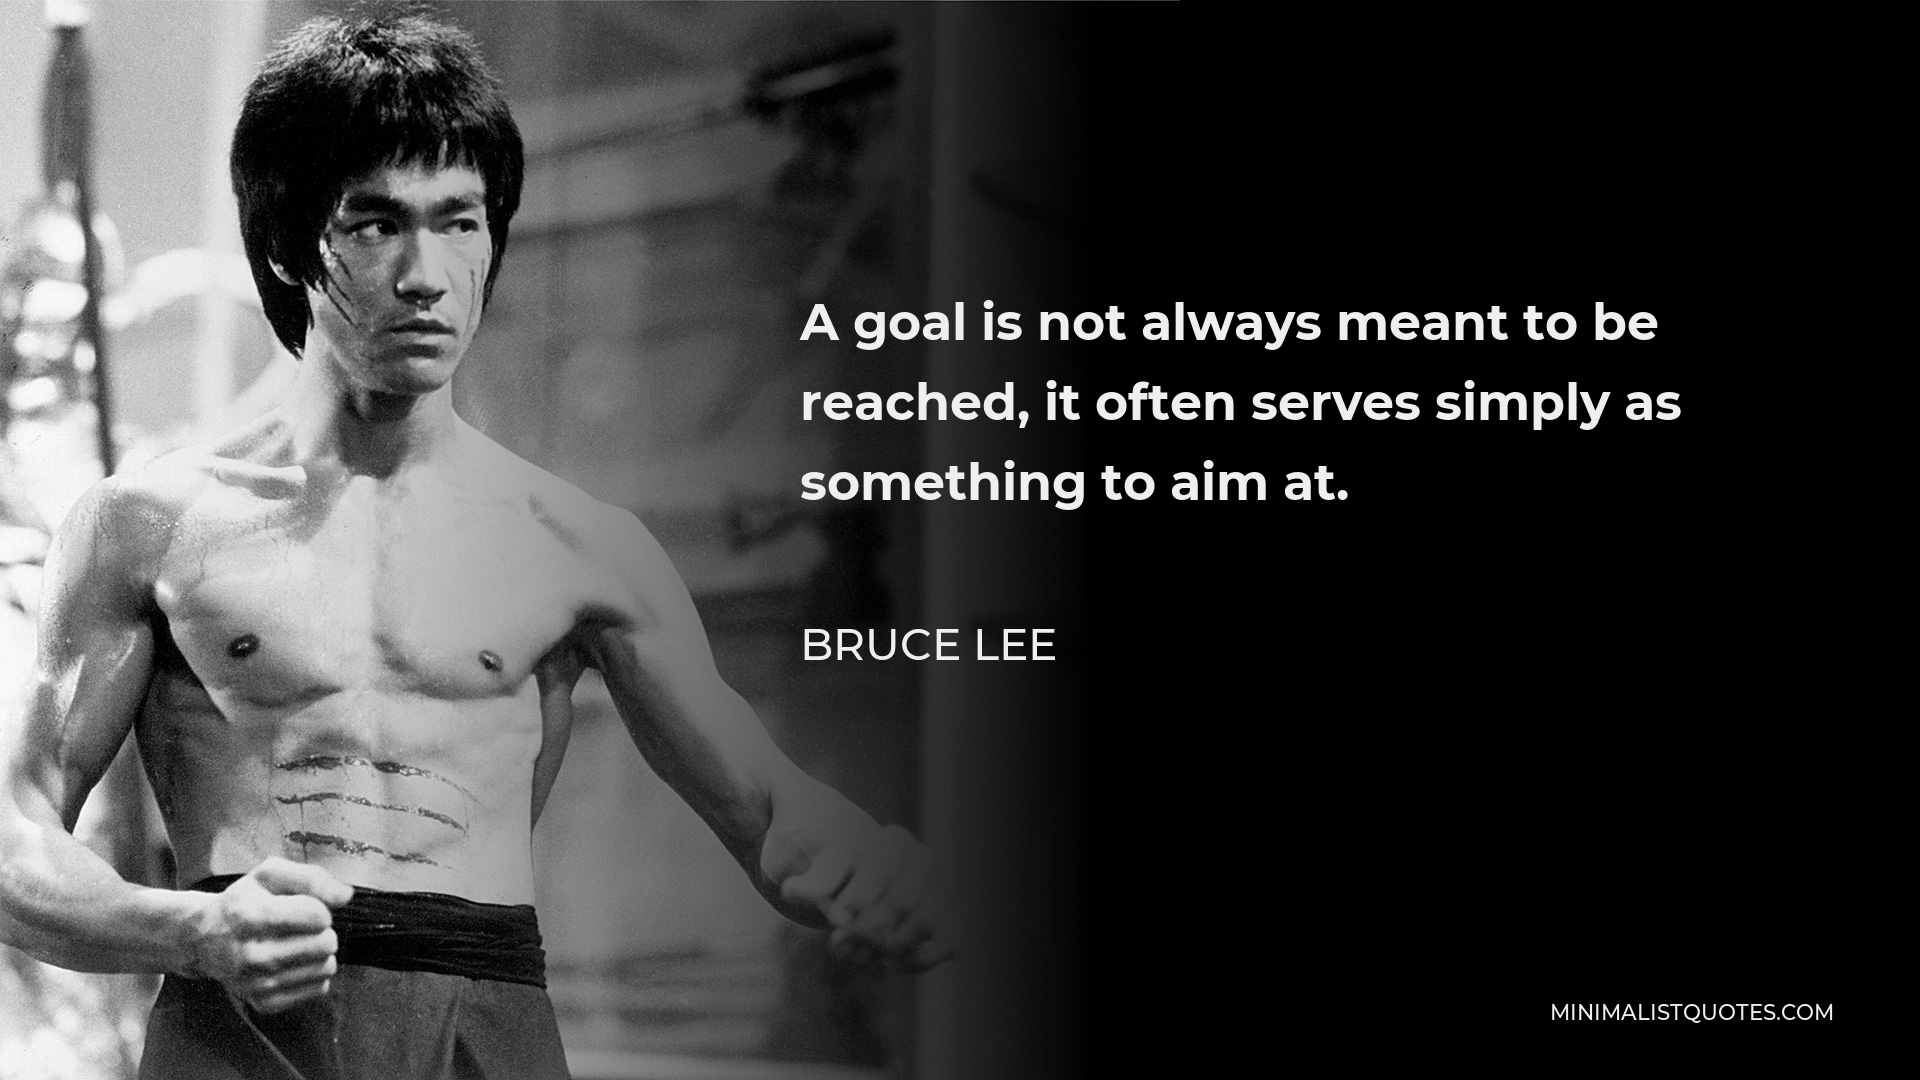 Bruce Lee Quote - A goal is not always meant to be reached, it often serves simply as something to aim at.